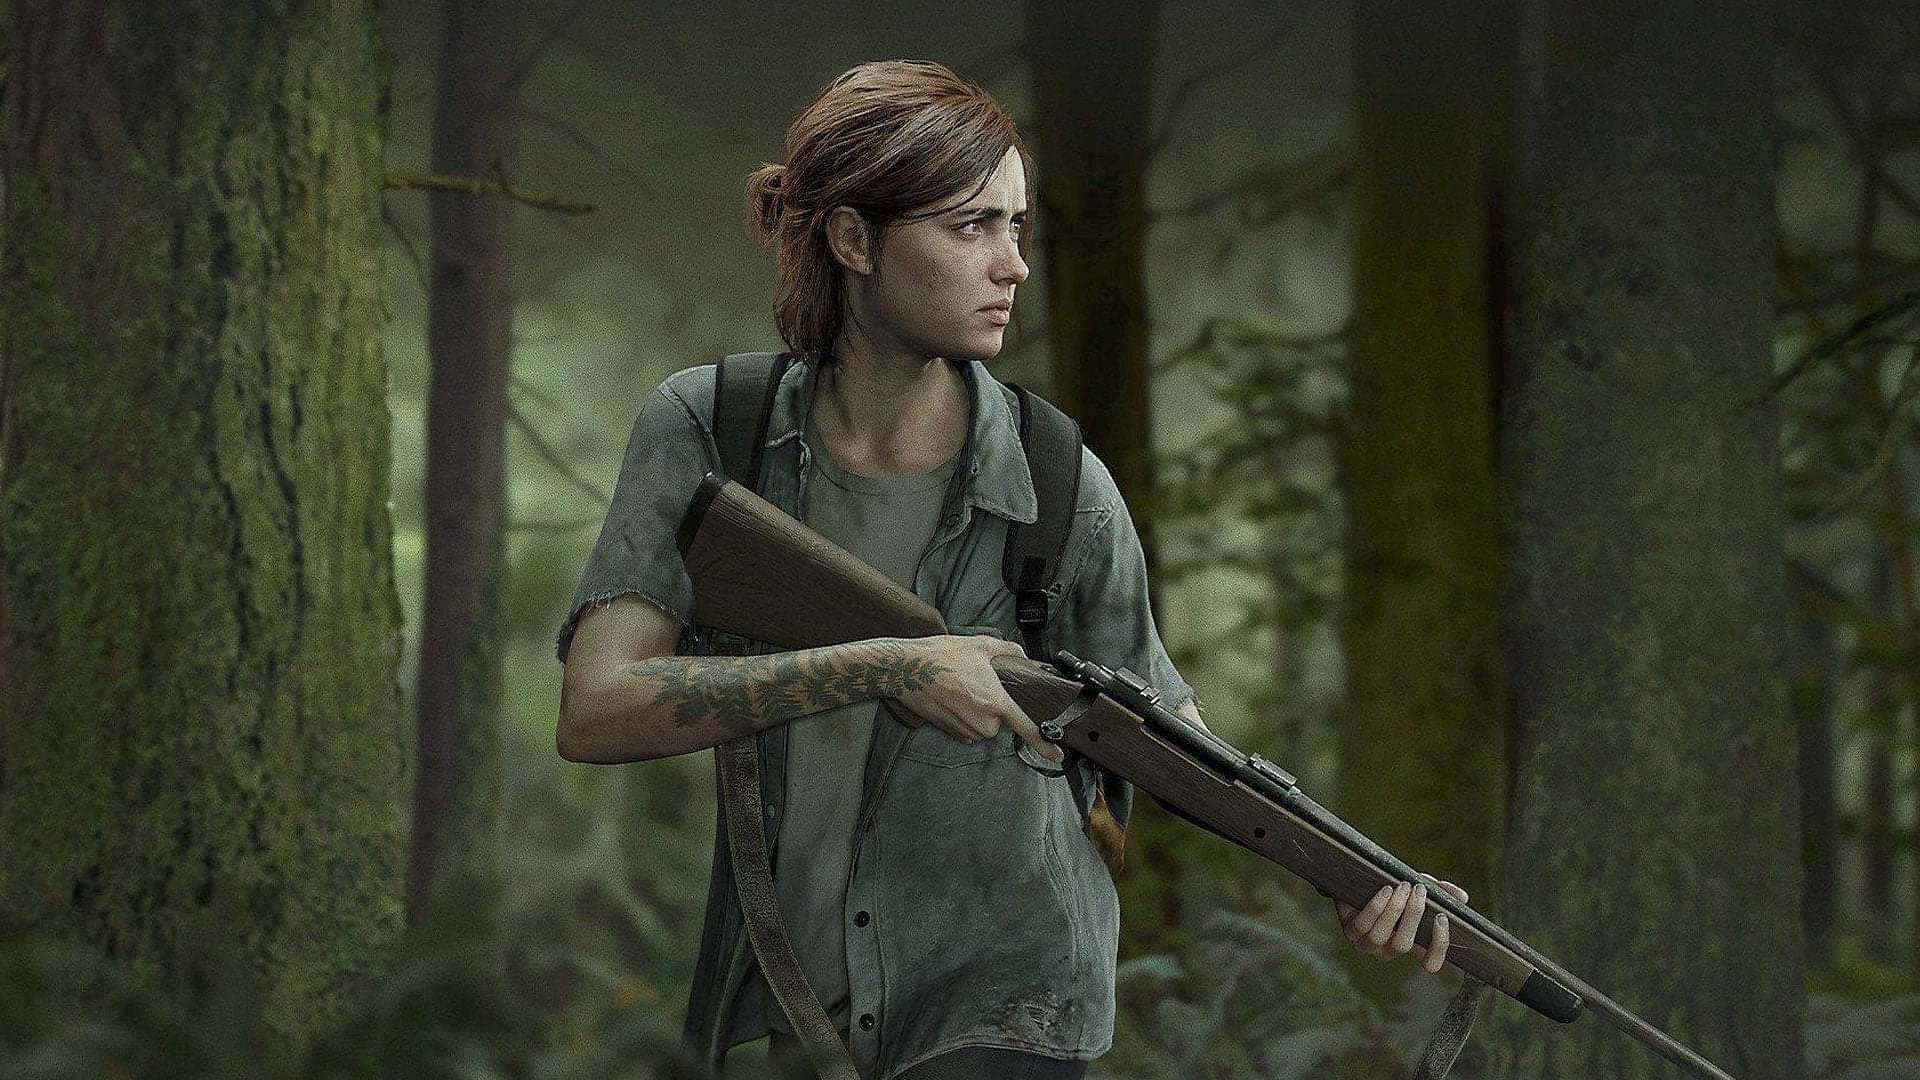 HD wallpaper: The Last of Us, The Last of Us 2, Naughty Dog, PlayStation